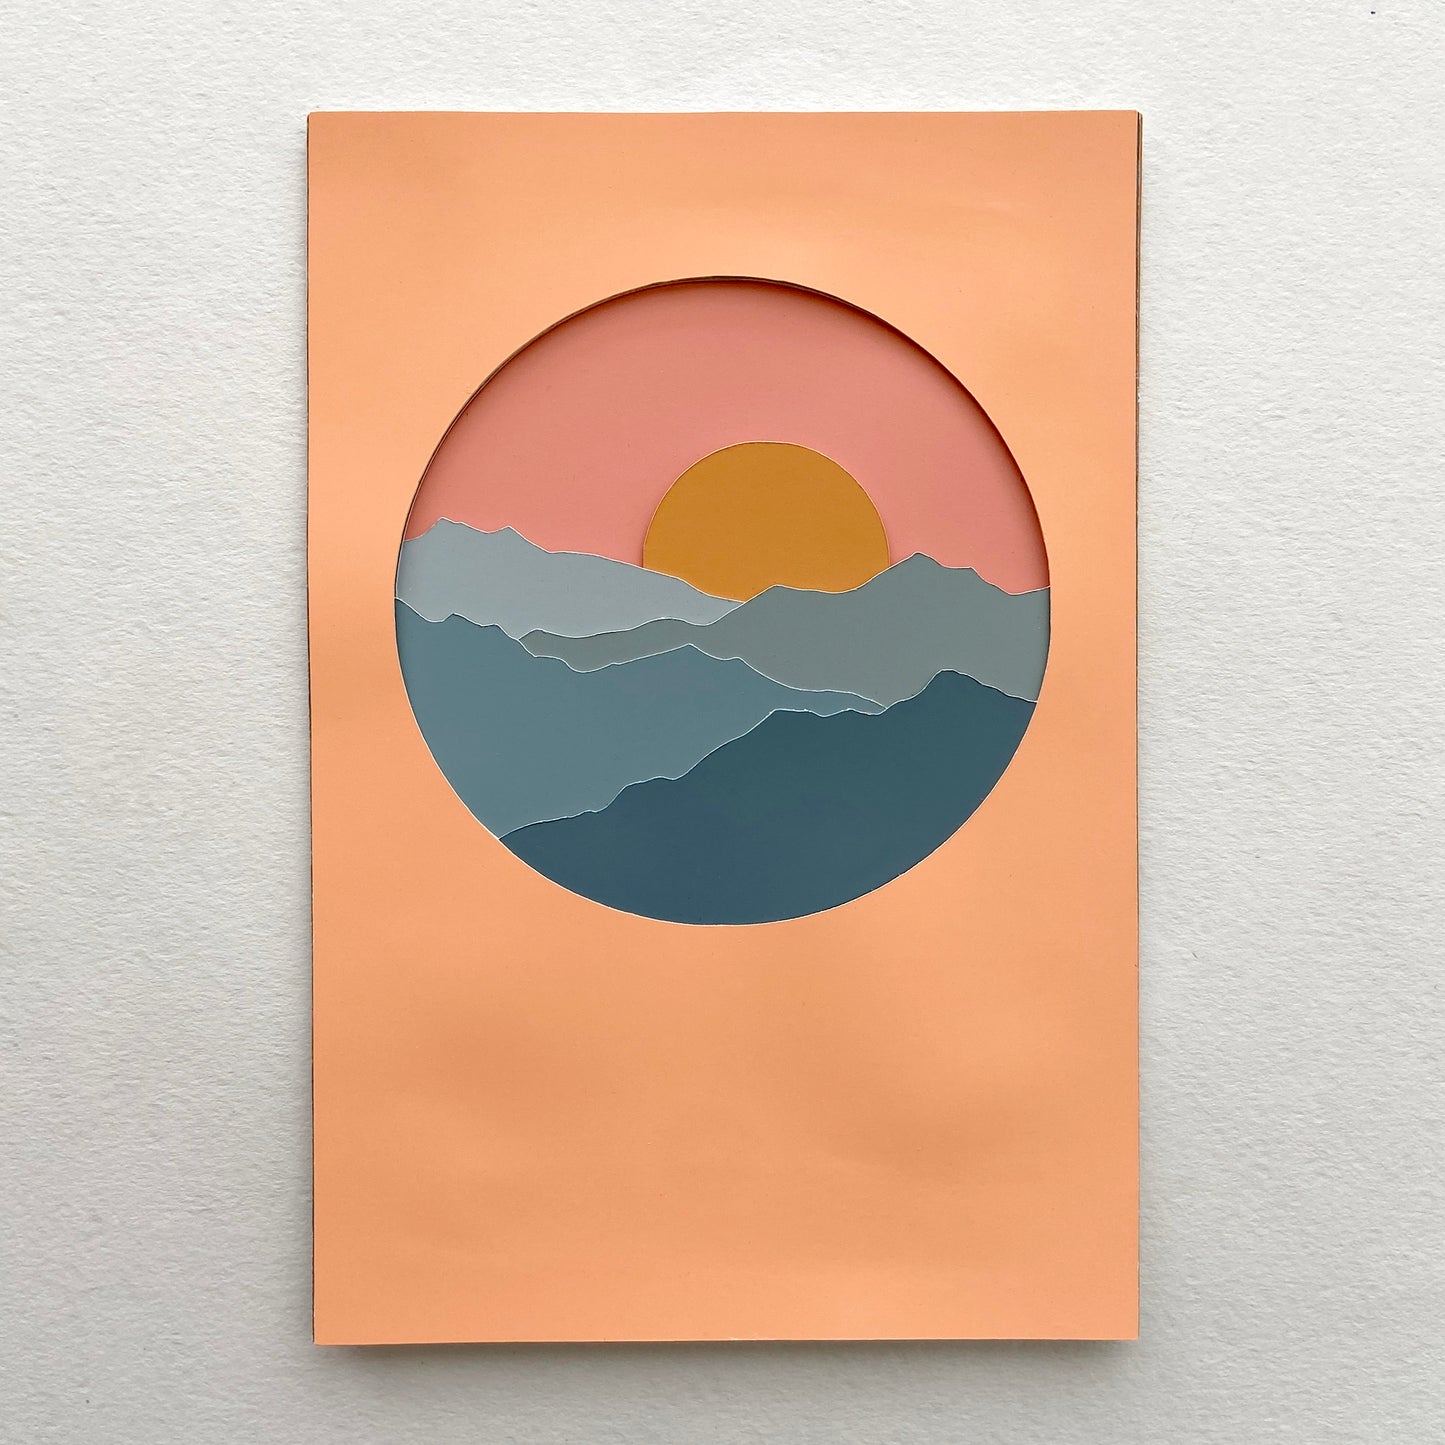 Sunset Olympic Mountain-scape Paper-cut Artwork